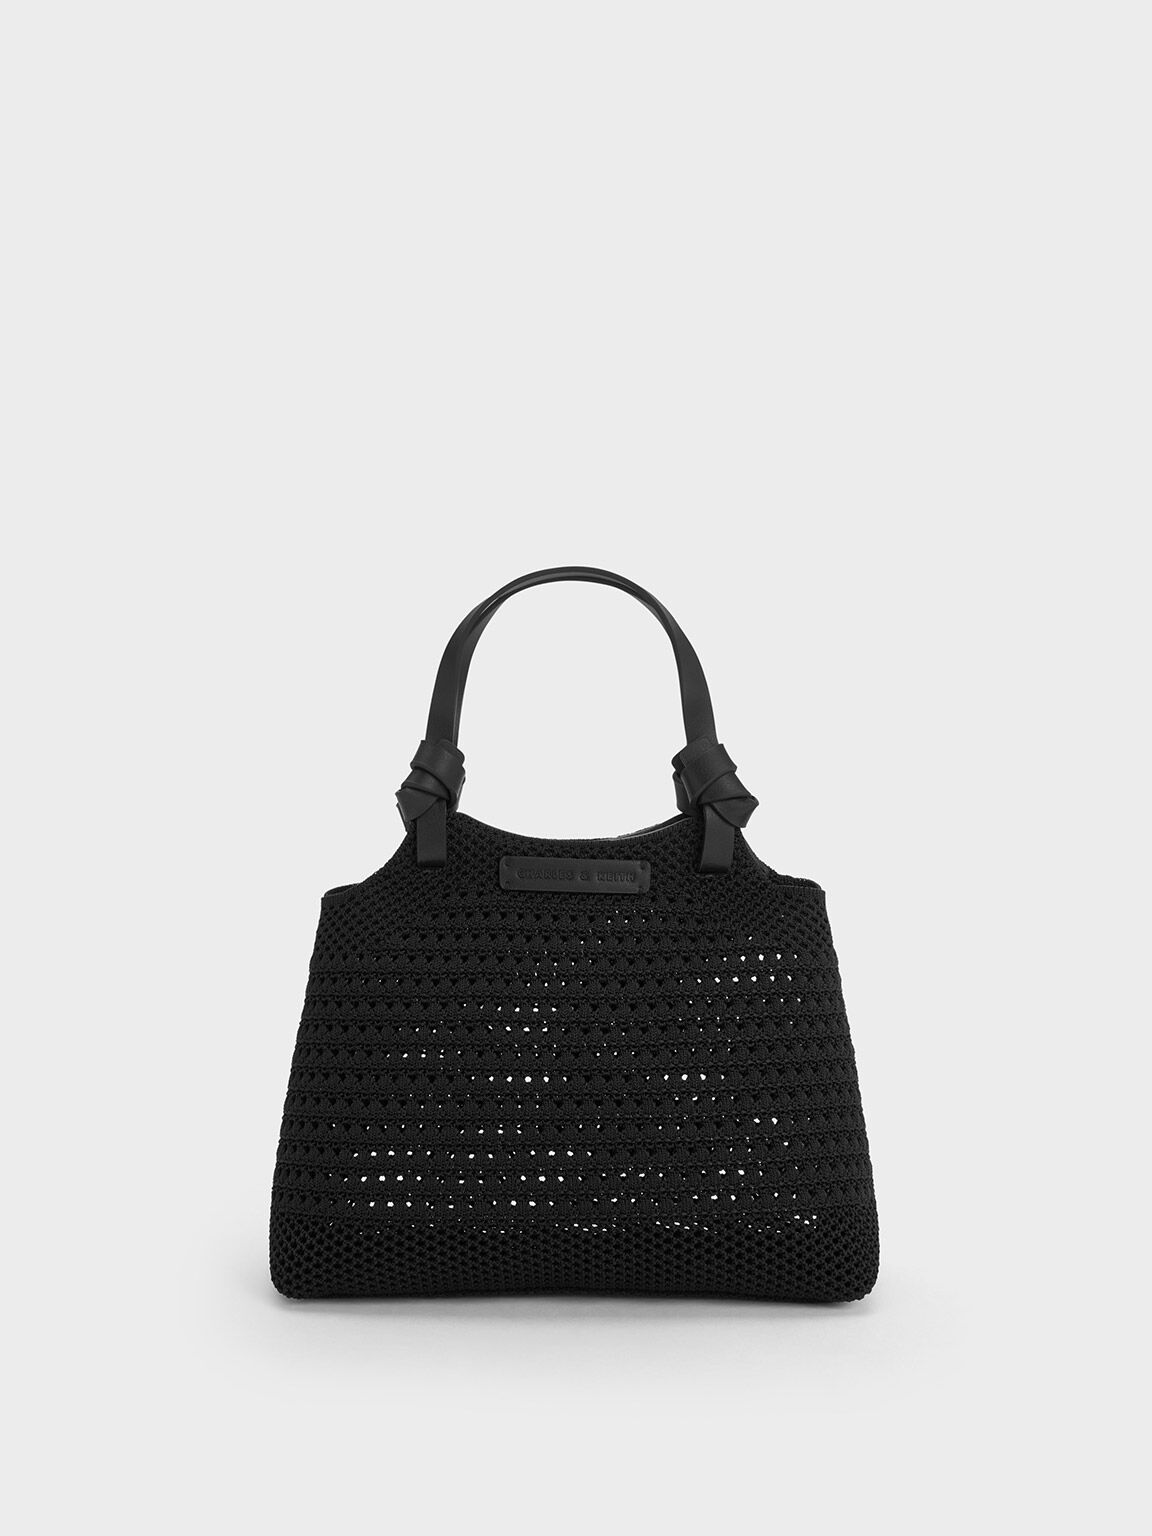 Knotted Handle Knitted Tote Bag, Black, hi-res